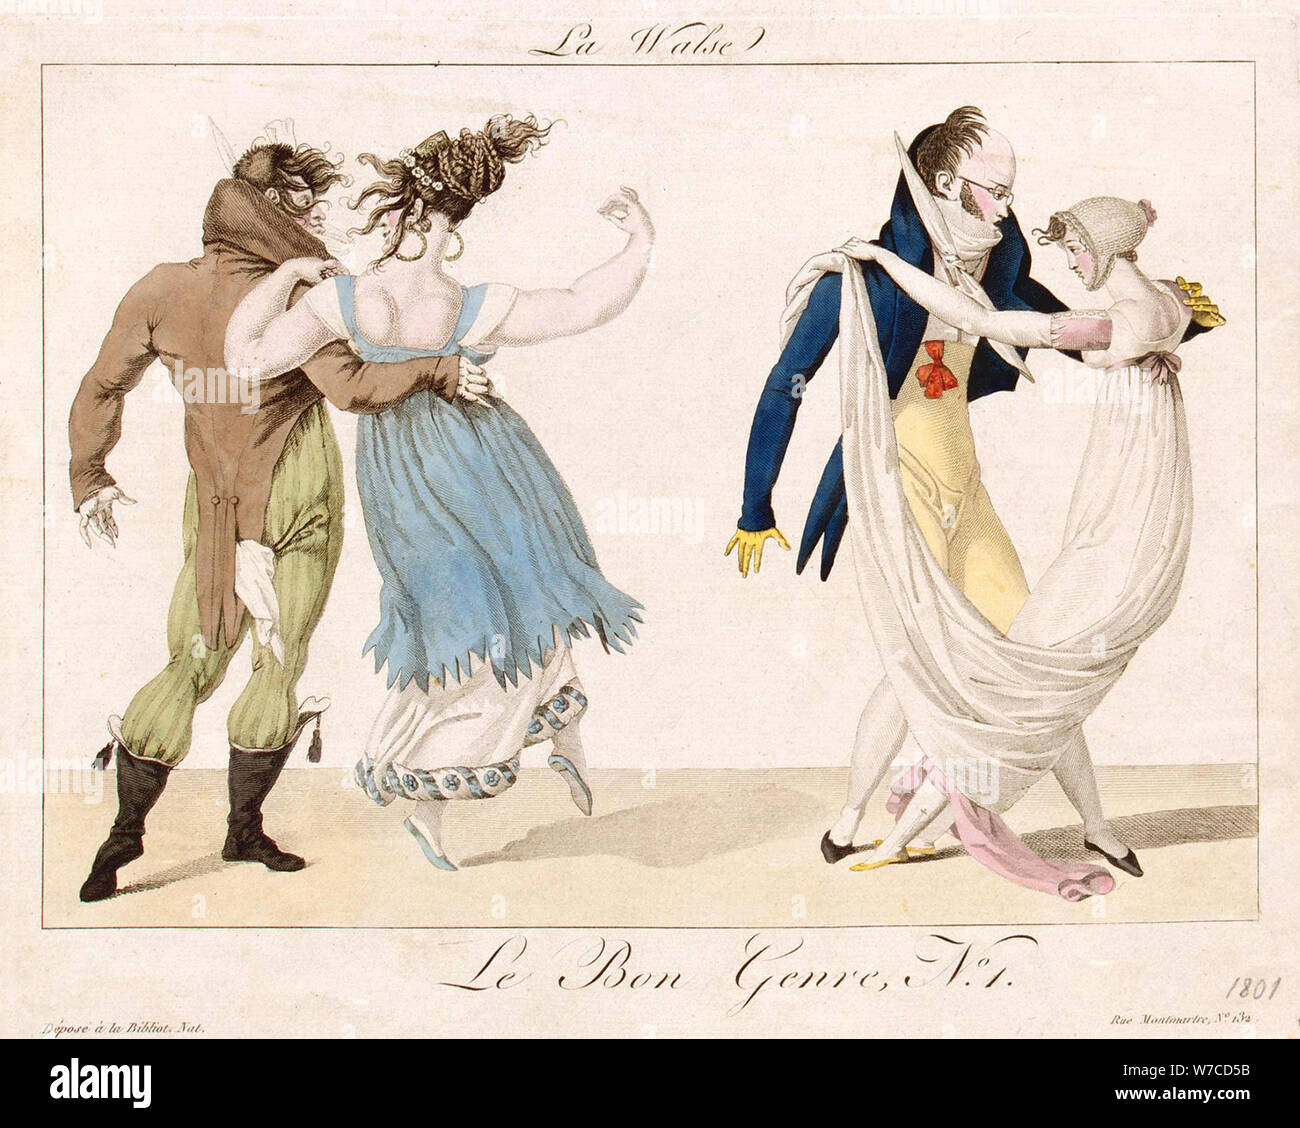 Waltz. From the series Le Bon Genre. Stock Photo